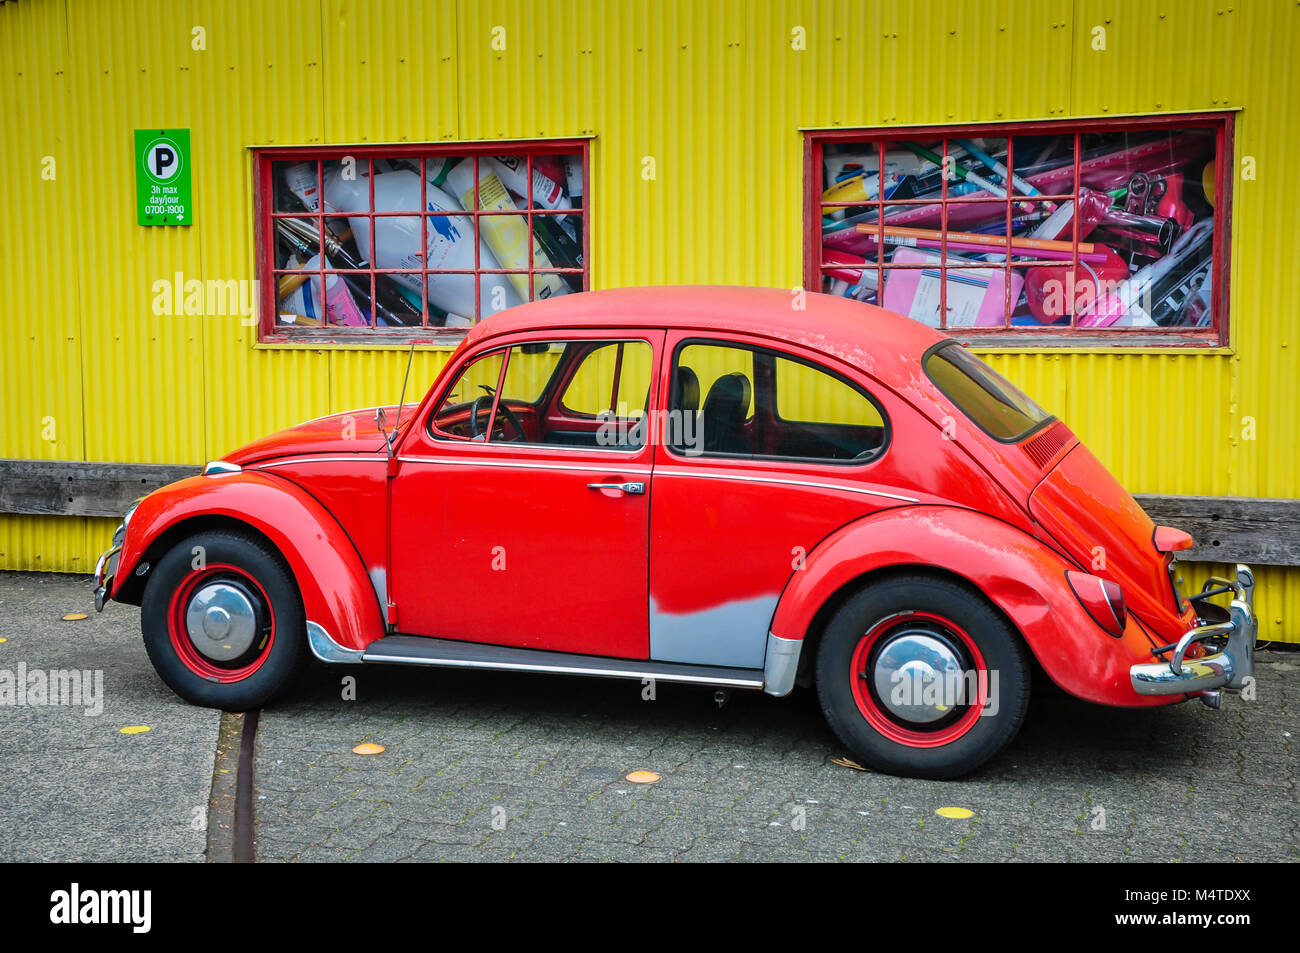 Vintage Volkswagon Bug car mostly painted red, parked in front of yellow corrugated tin wall. Stock Photo